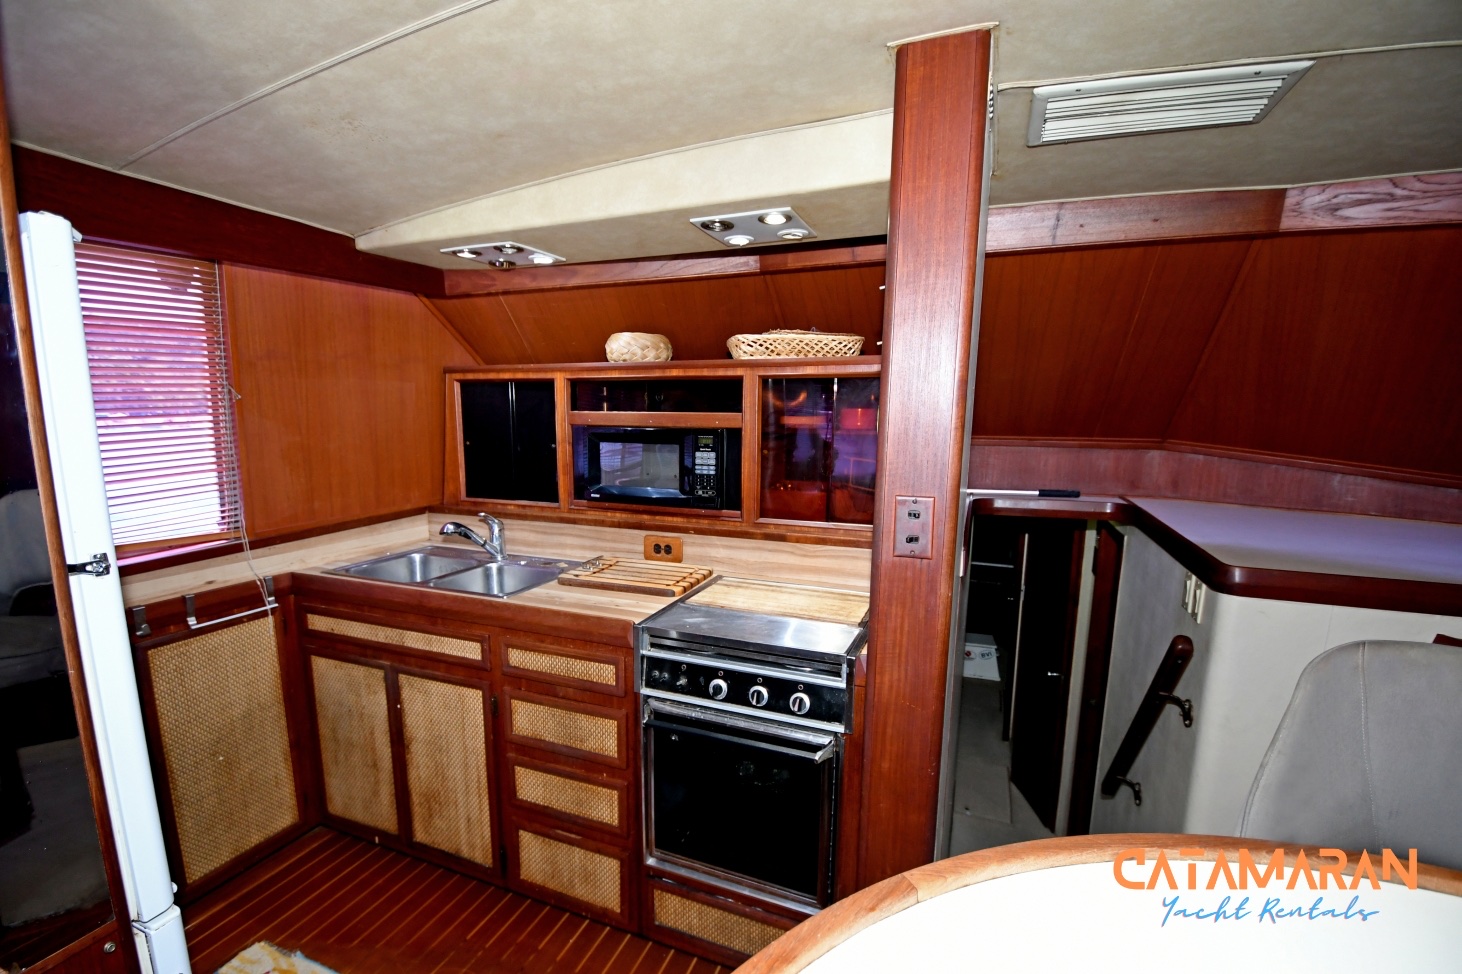 View of the beautiful kitchen of the boat in sosua